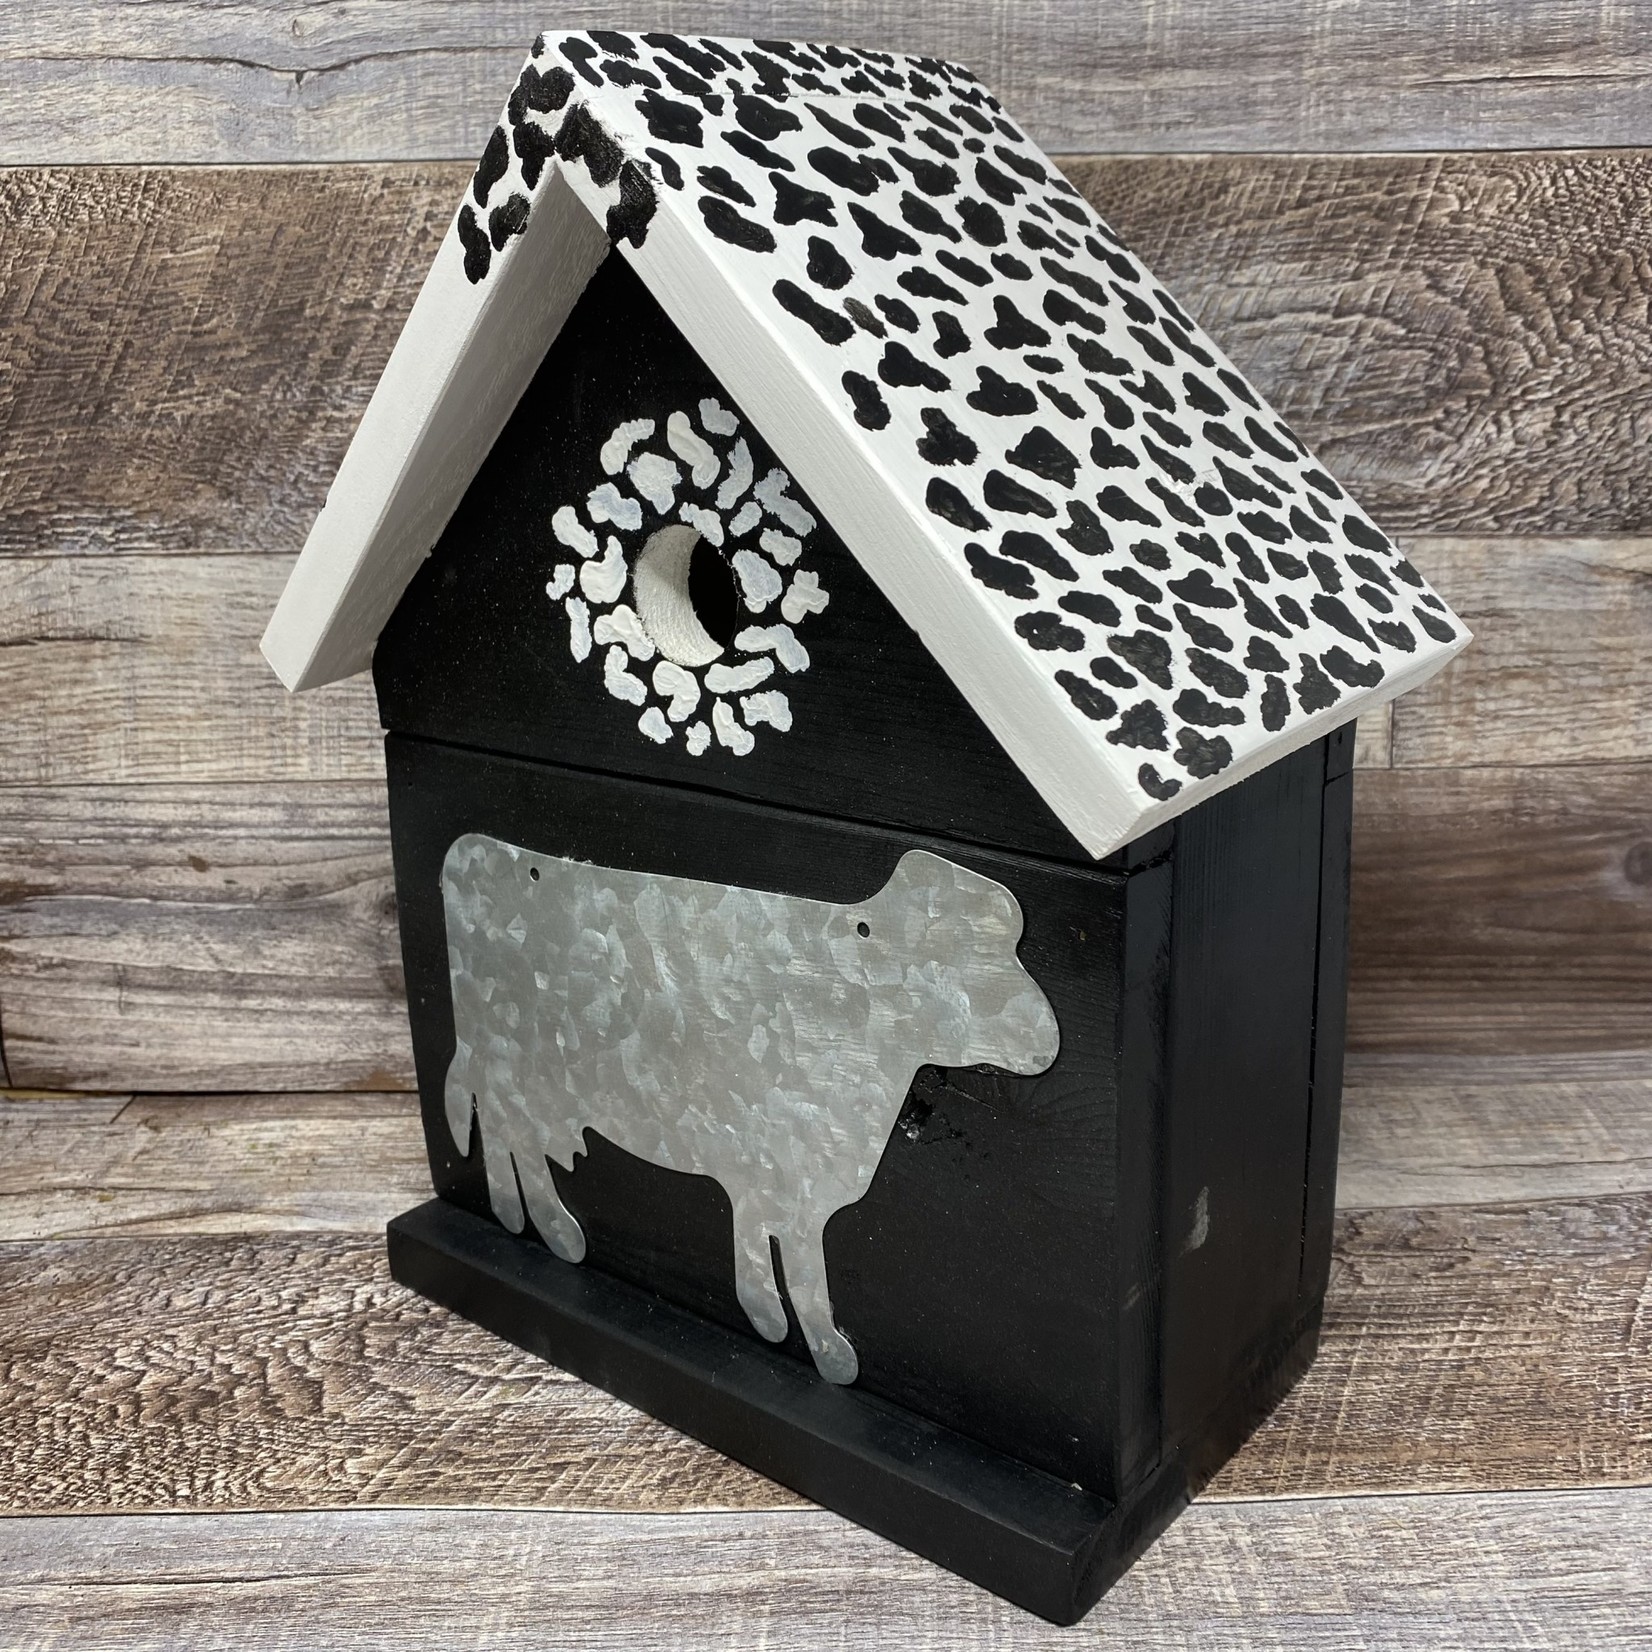 Vern's Painted Bird House - Black and White Cow Print